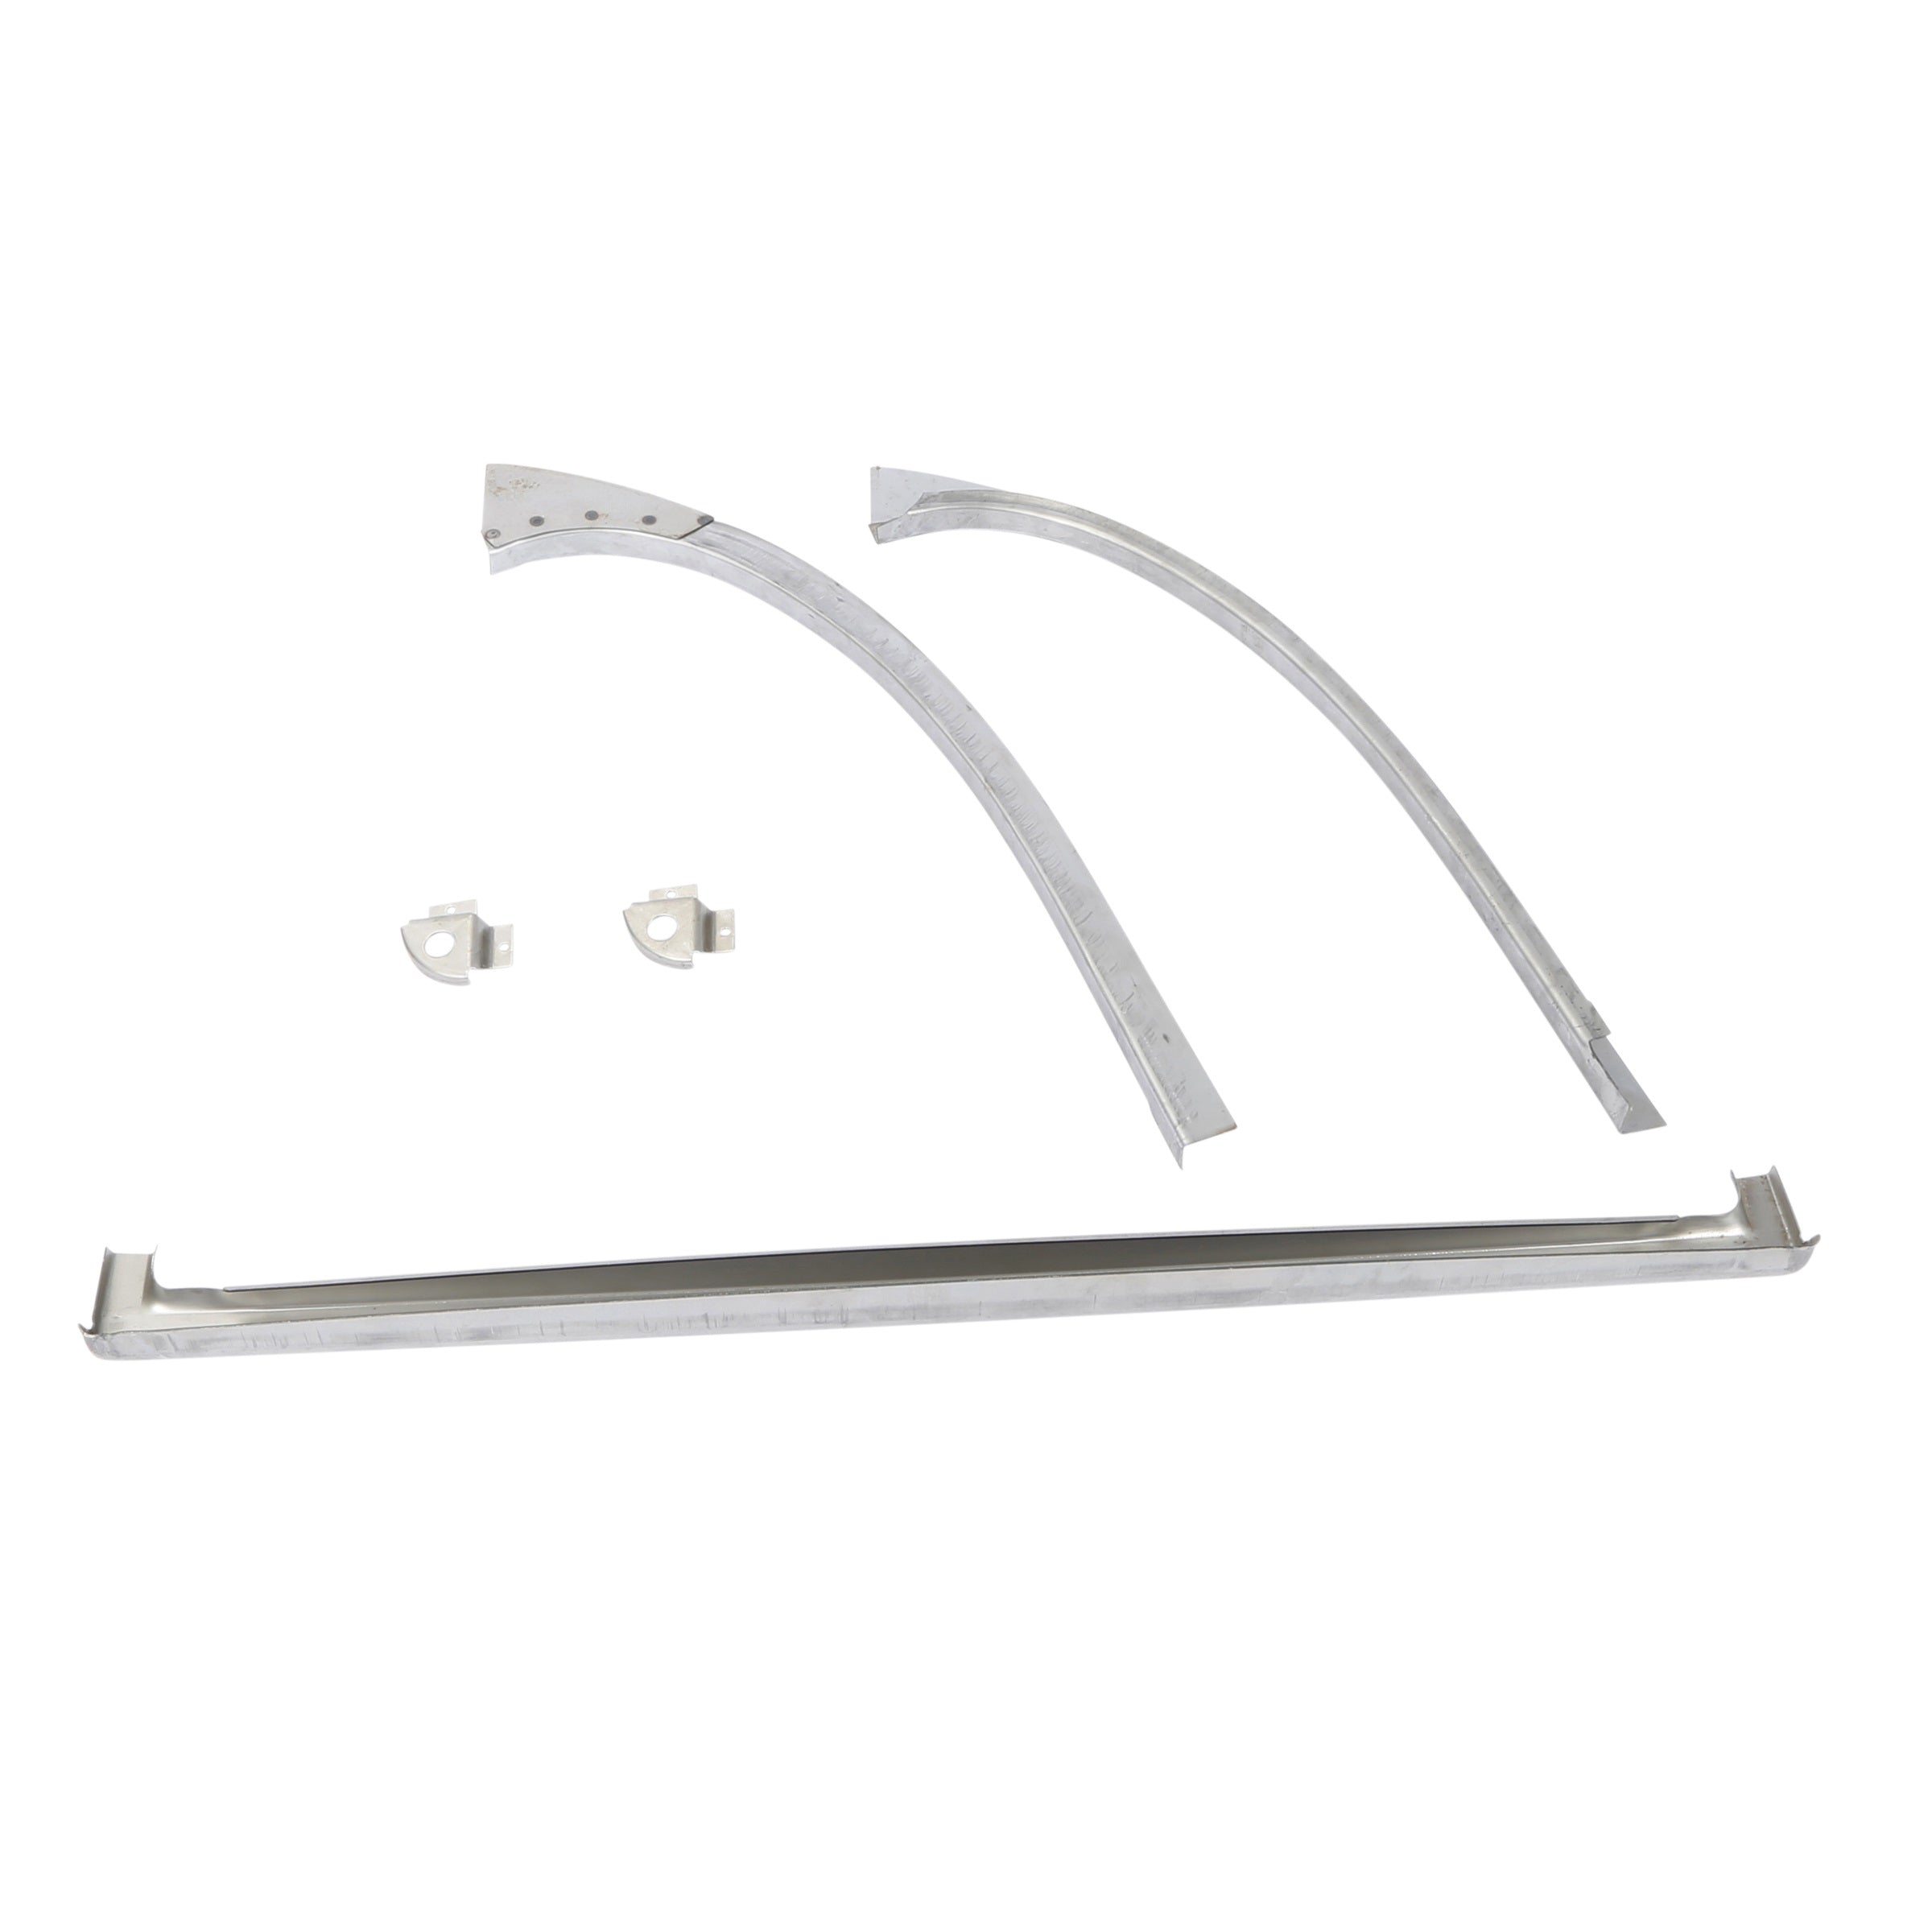 Trunk or Rumble Seat Rain Gutter • 1930-31 Model A Ford